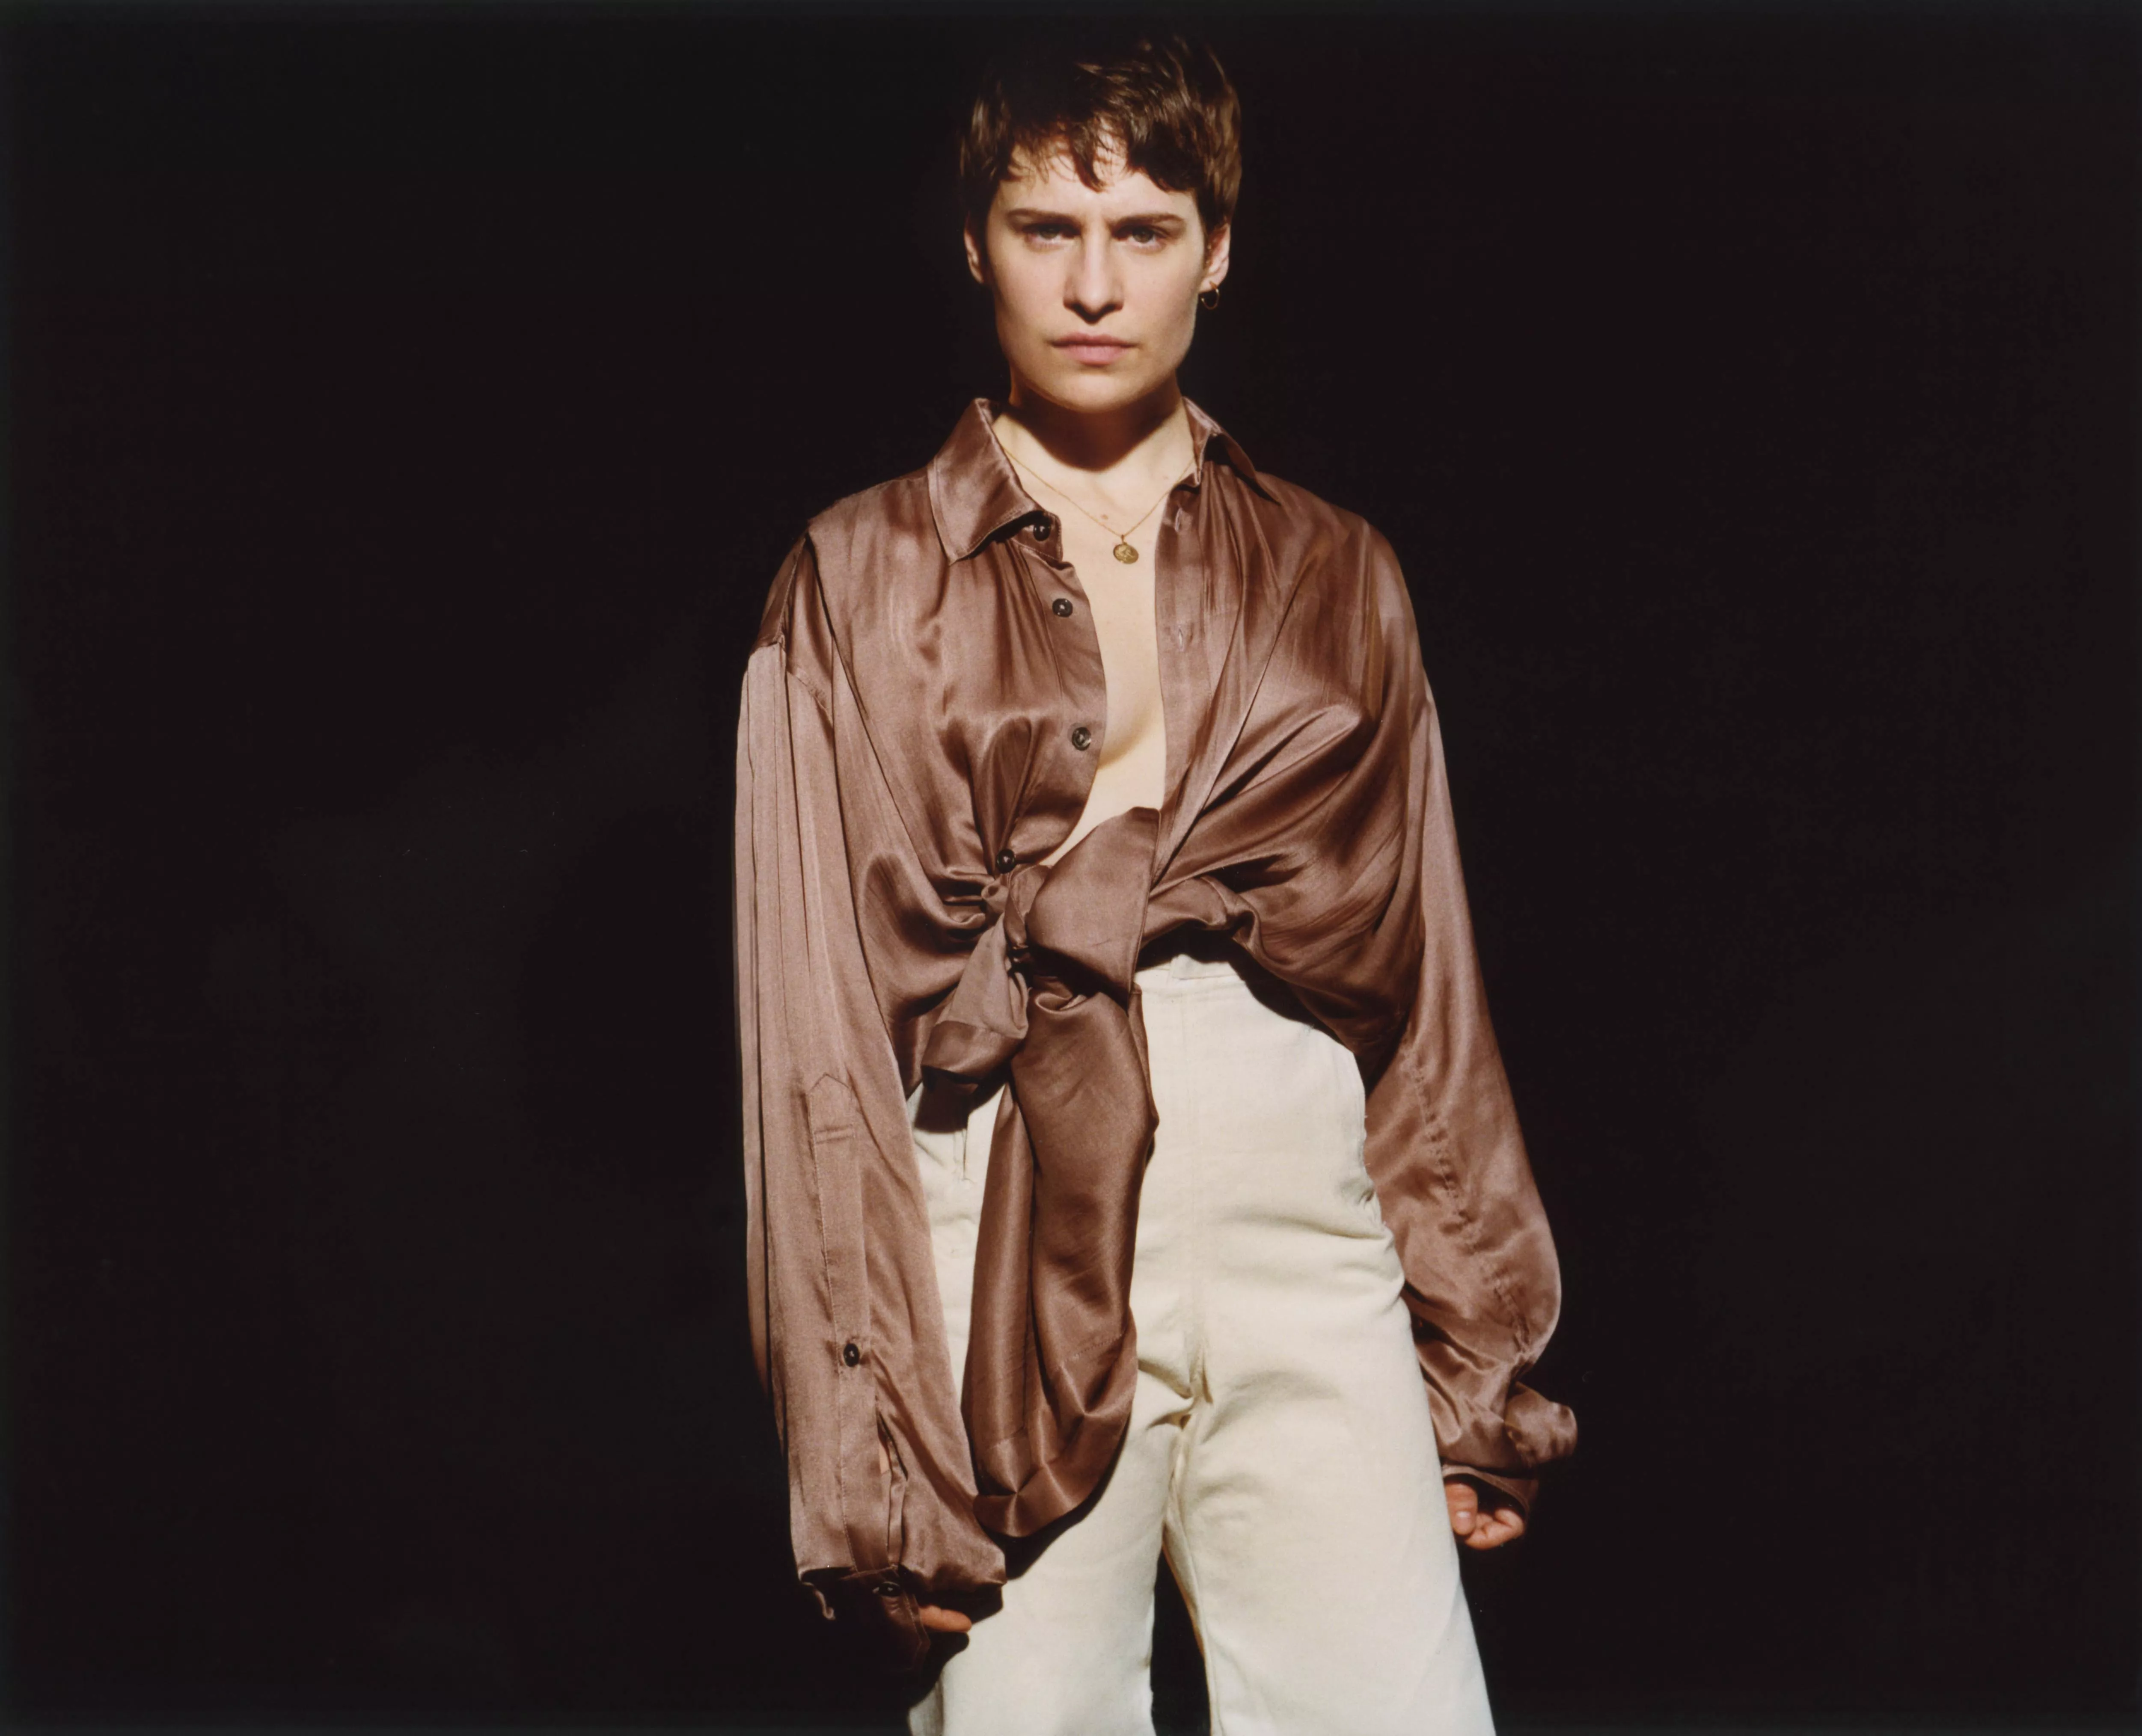 Christine and the Queens-interview: Trygheden ved at udtrykke sig frit